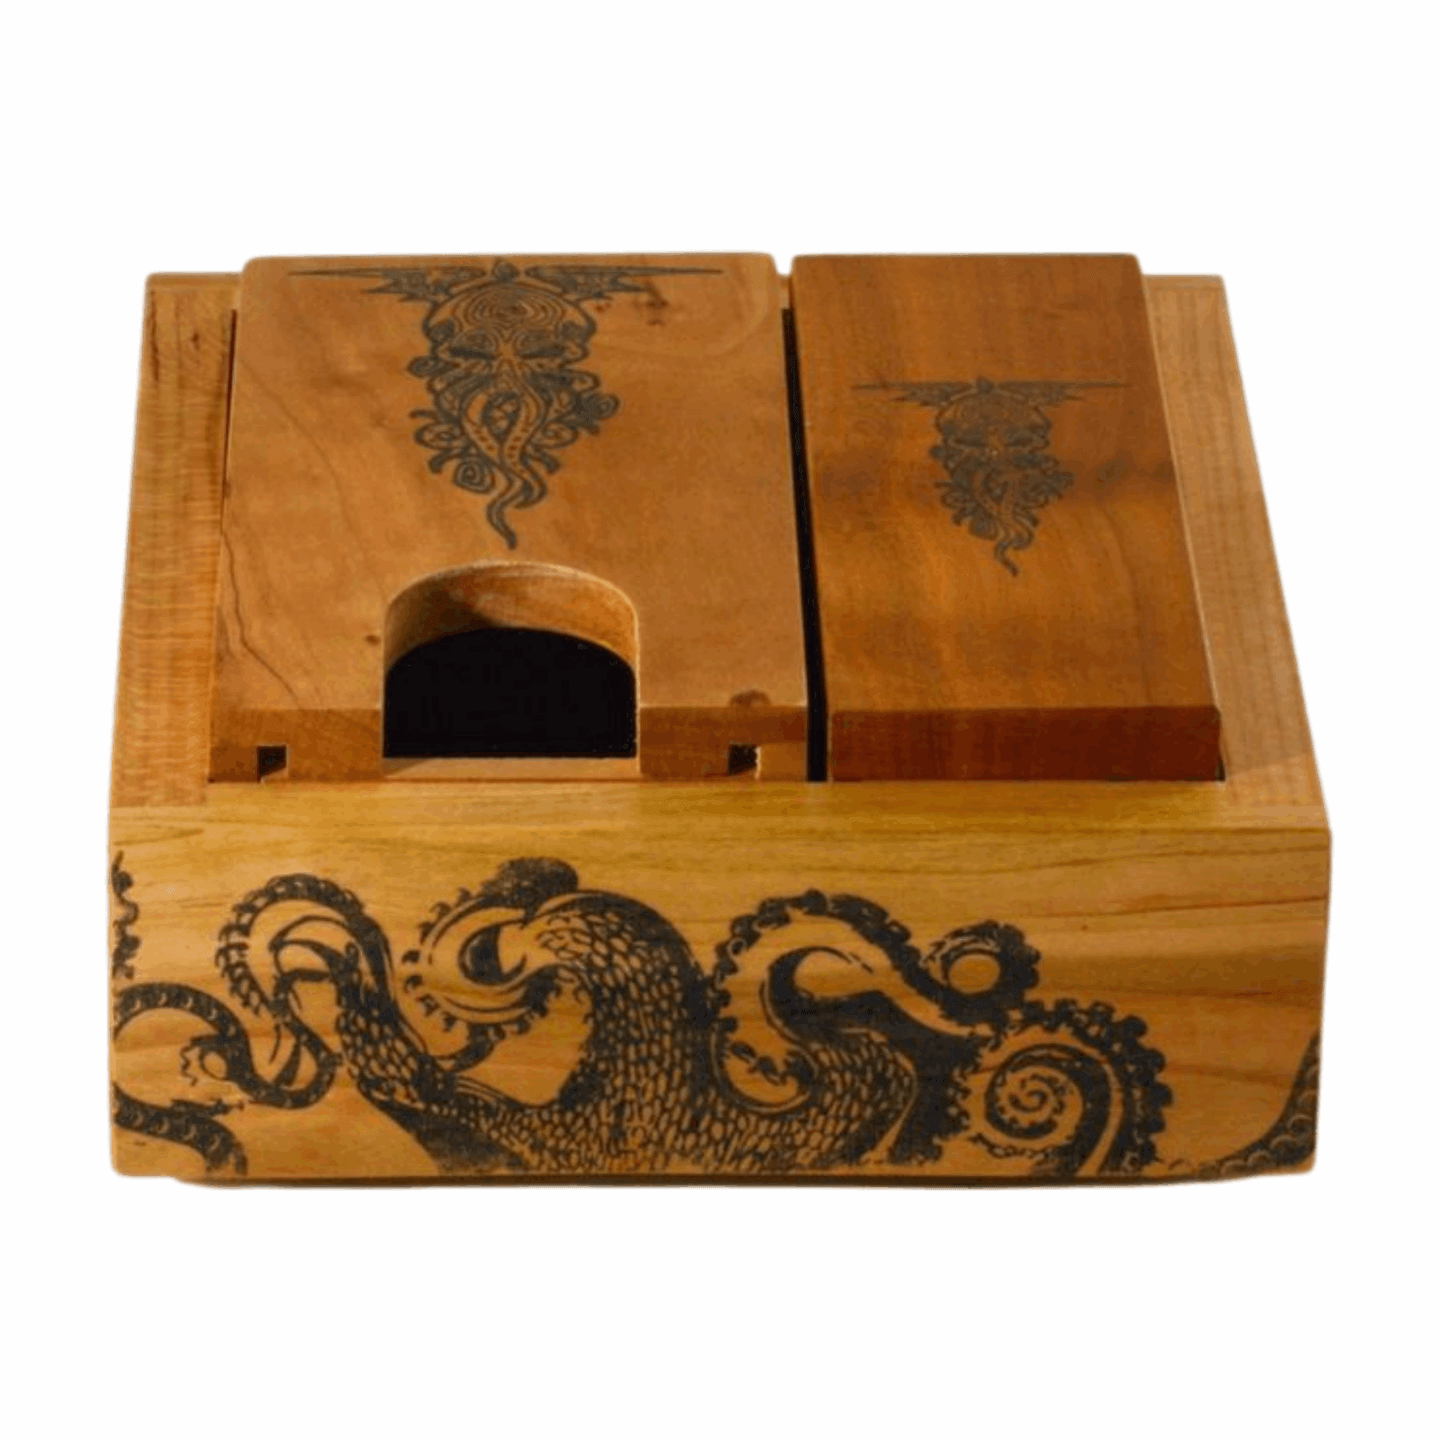 Cthulhu Dice Tower and Vault Laying Flat in Tentacle Dice Tray